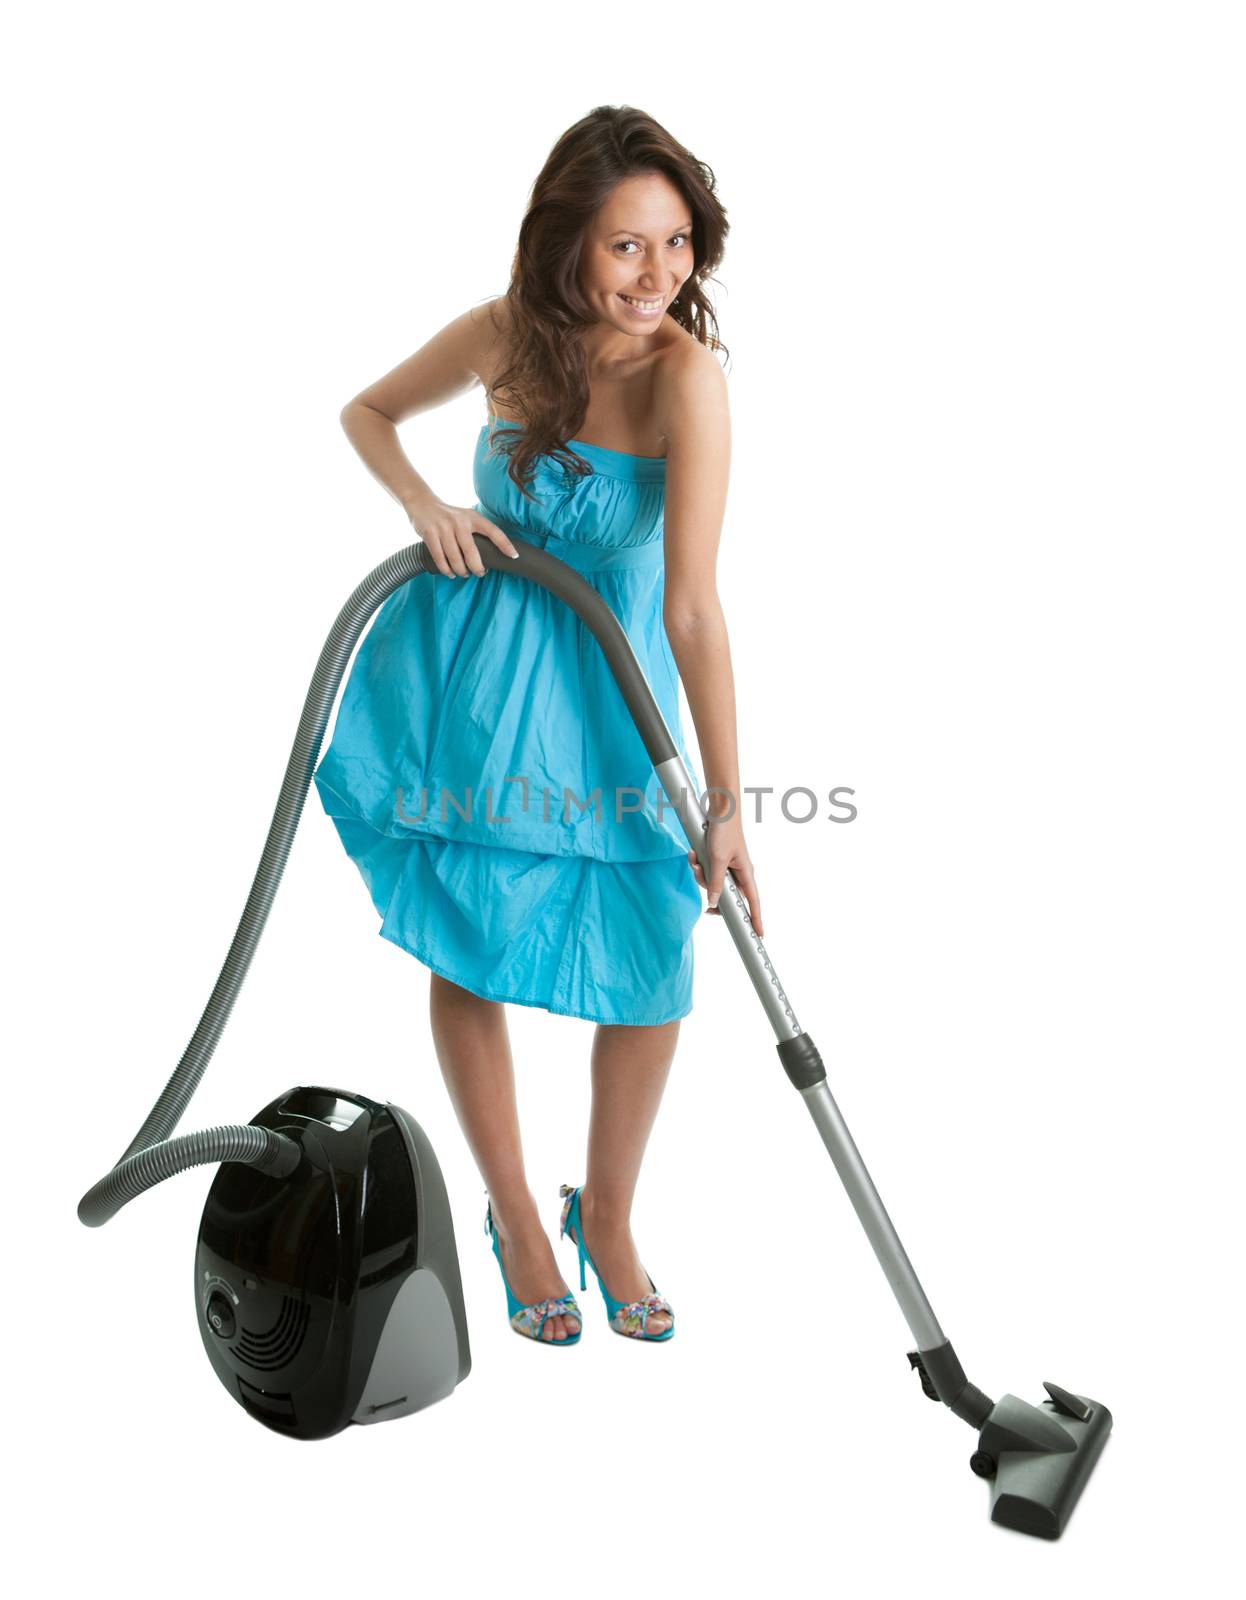 Cheerful woman with handheld vacuum cleaner. Isolated on white